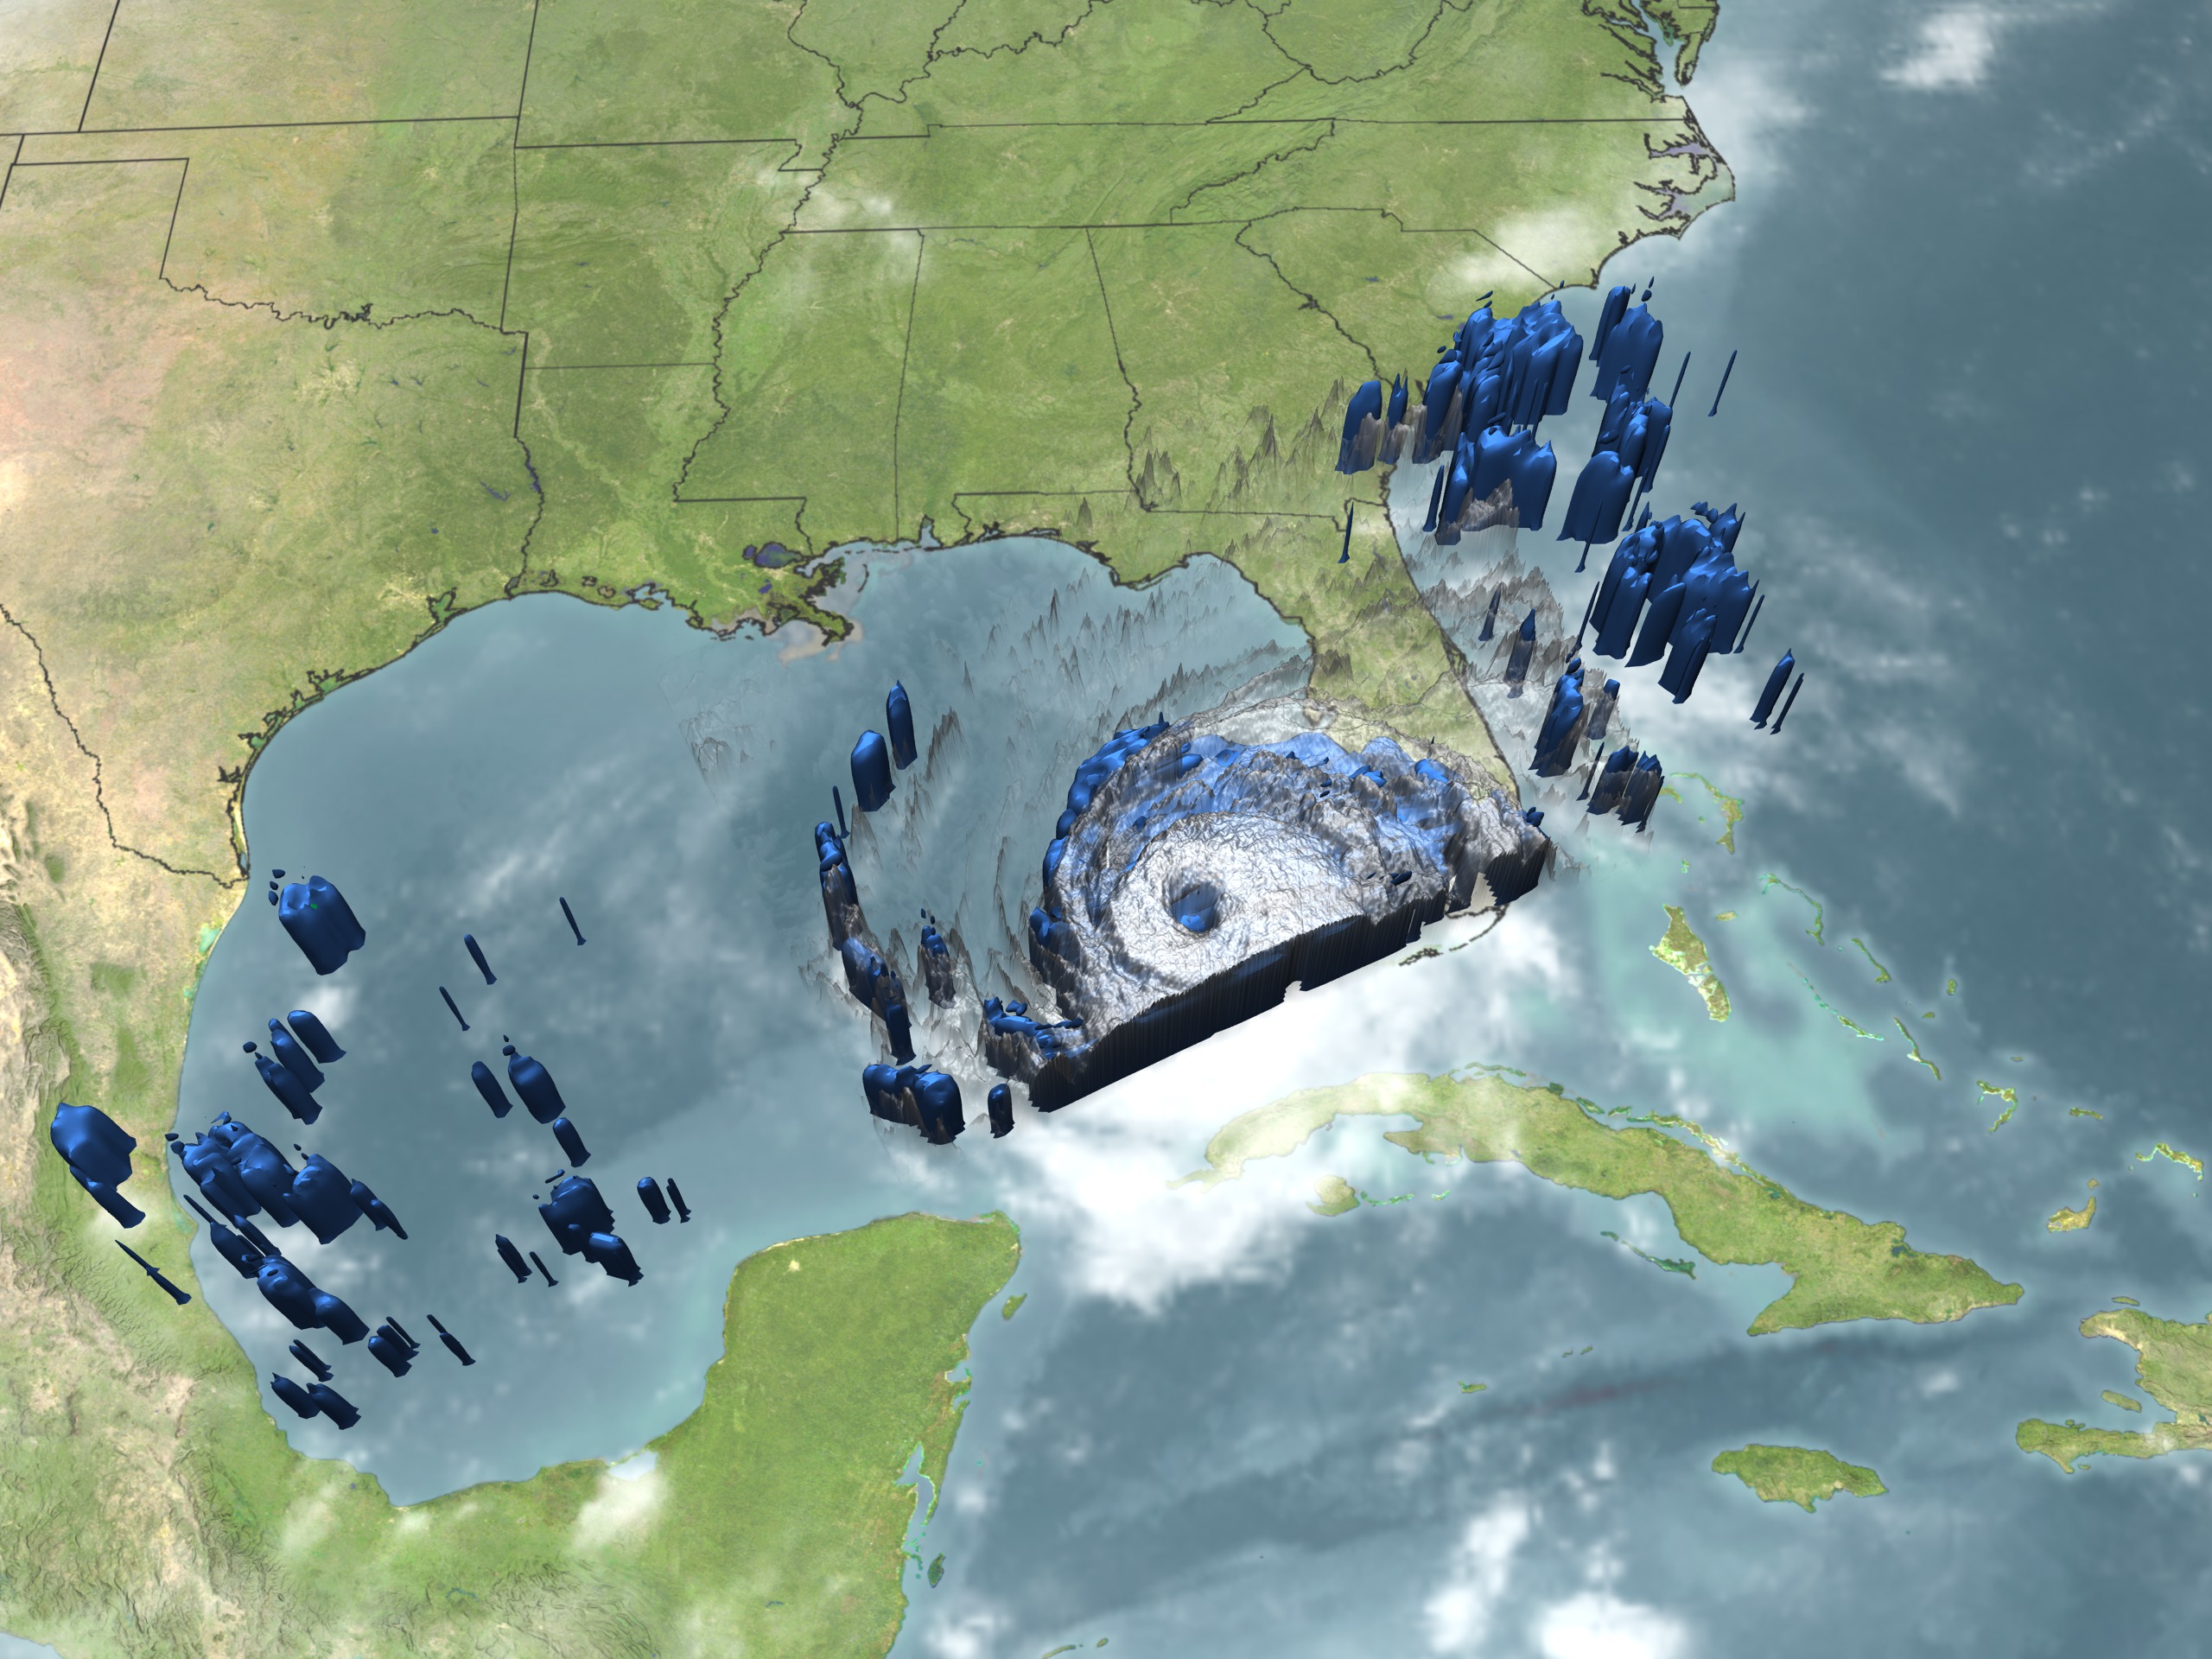 Hurricane Rita on September 21, 2005 at 0909Z.  The storm has a 25 nautical mile eye diameter.  Blue represents the rain structure that is fueling the storm.